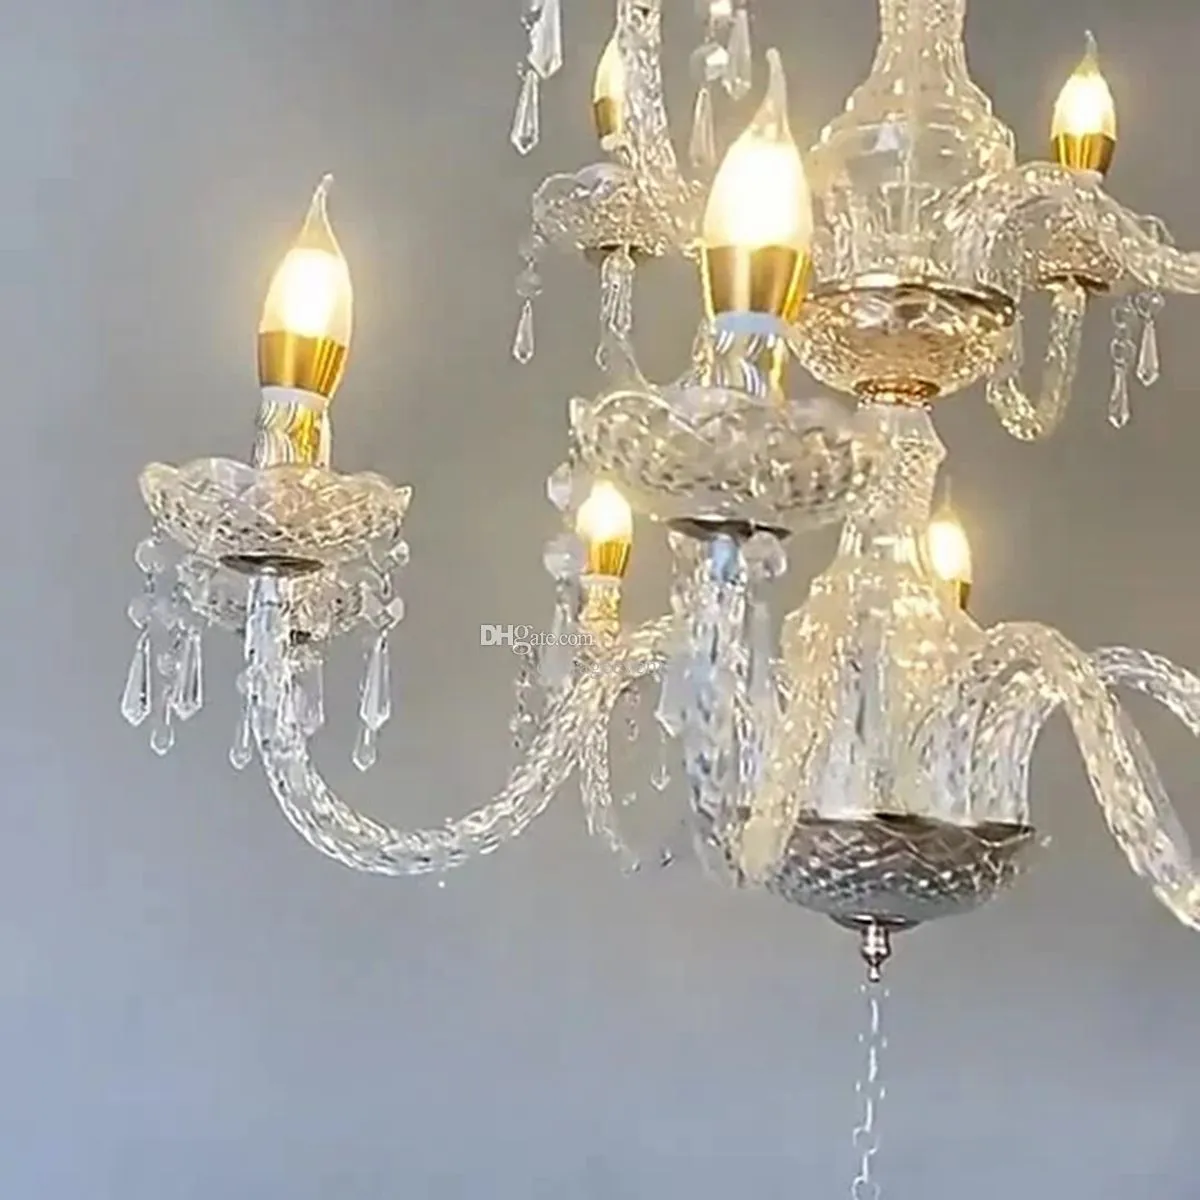 Hotel wedding lamps chandelier cheap new wedding crystal gold chandelier decoration props wrought ceiling decoration 225